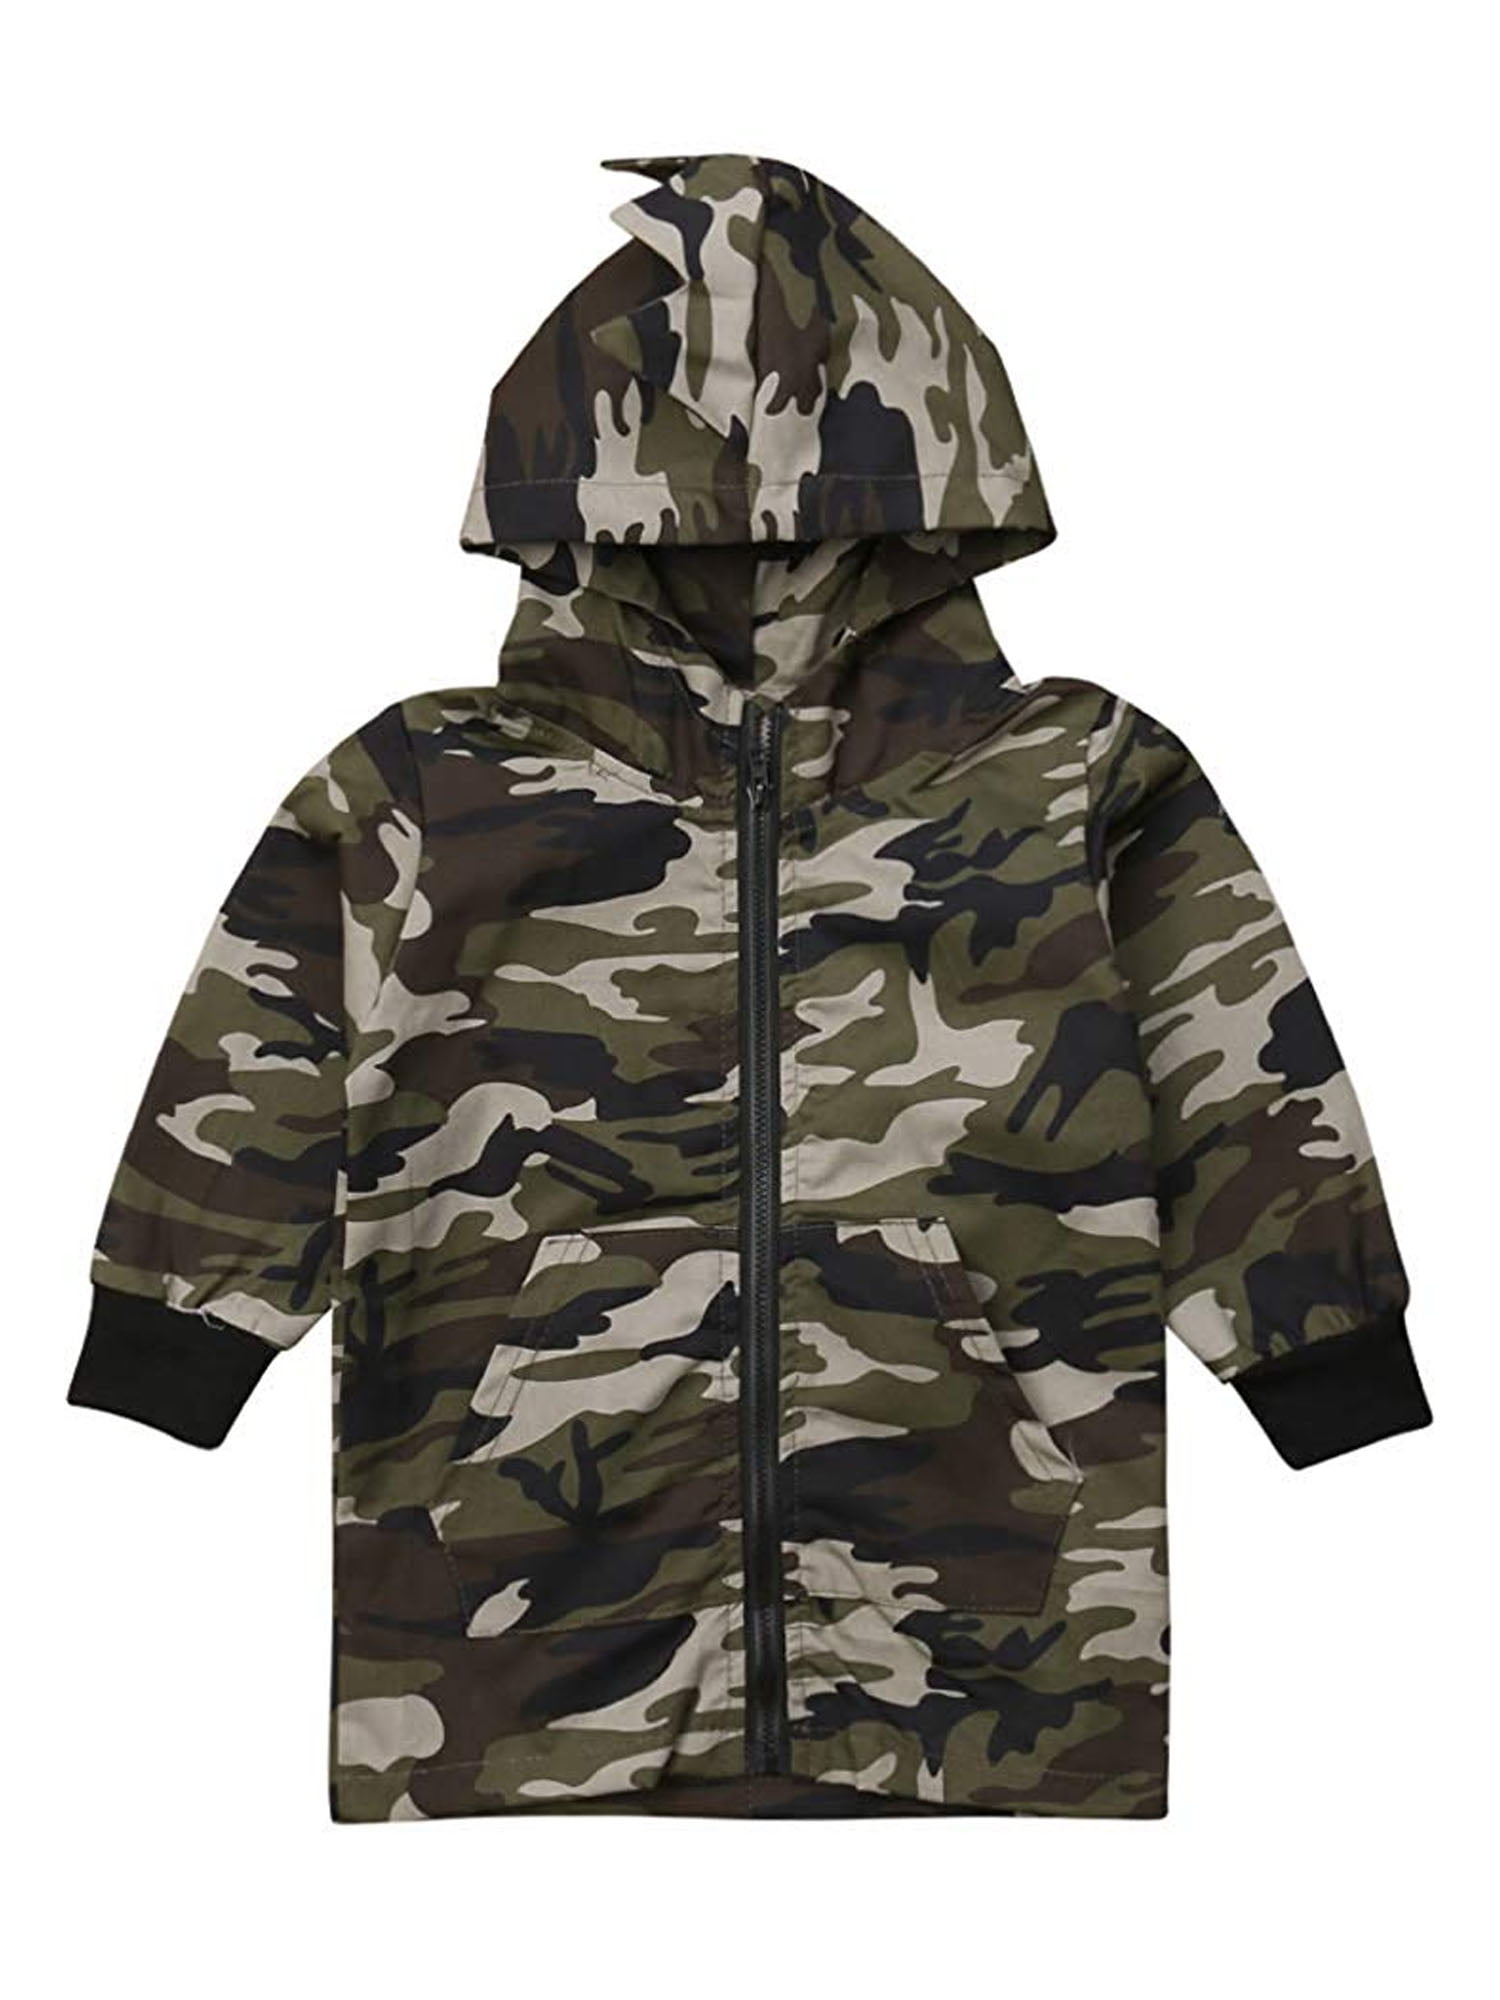 Childrens Forest Camouflage Jacket Realtree Jungle Camo Shower Proof Coat 5-14 